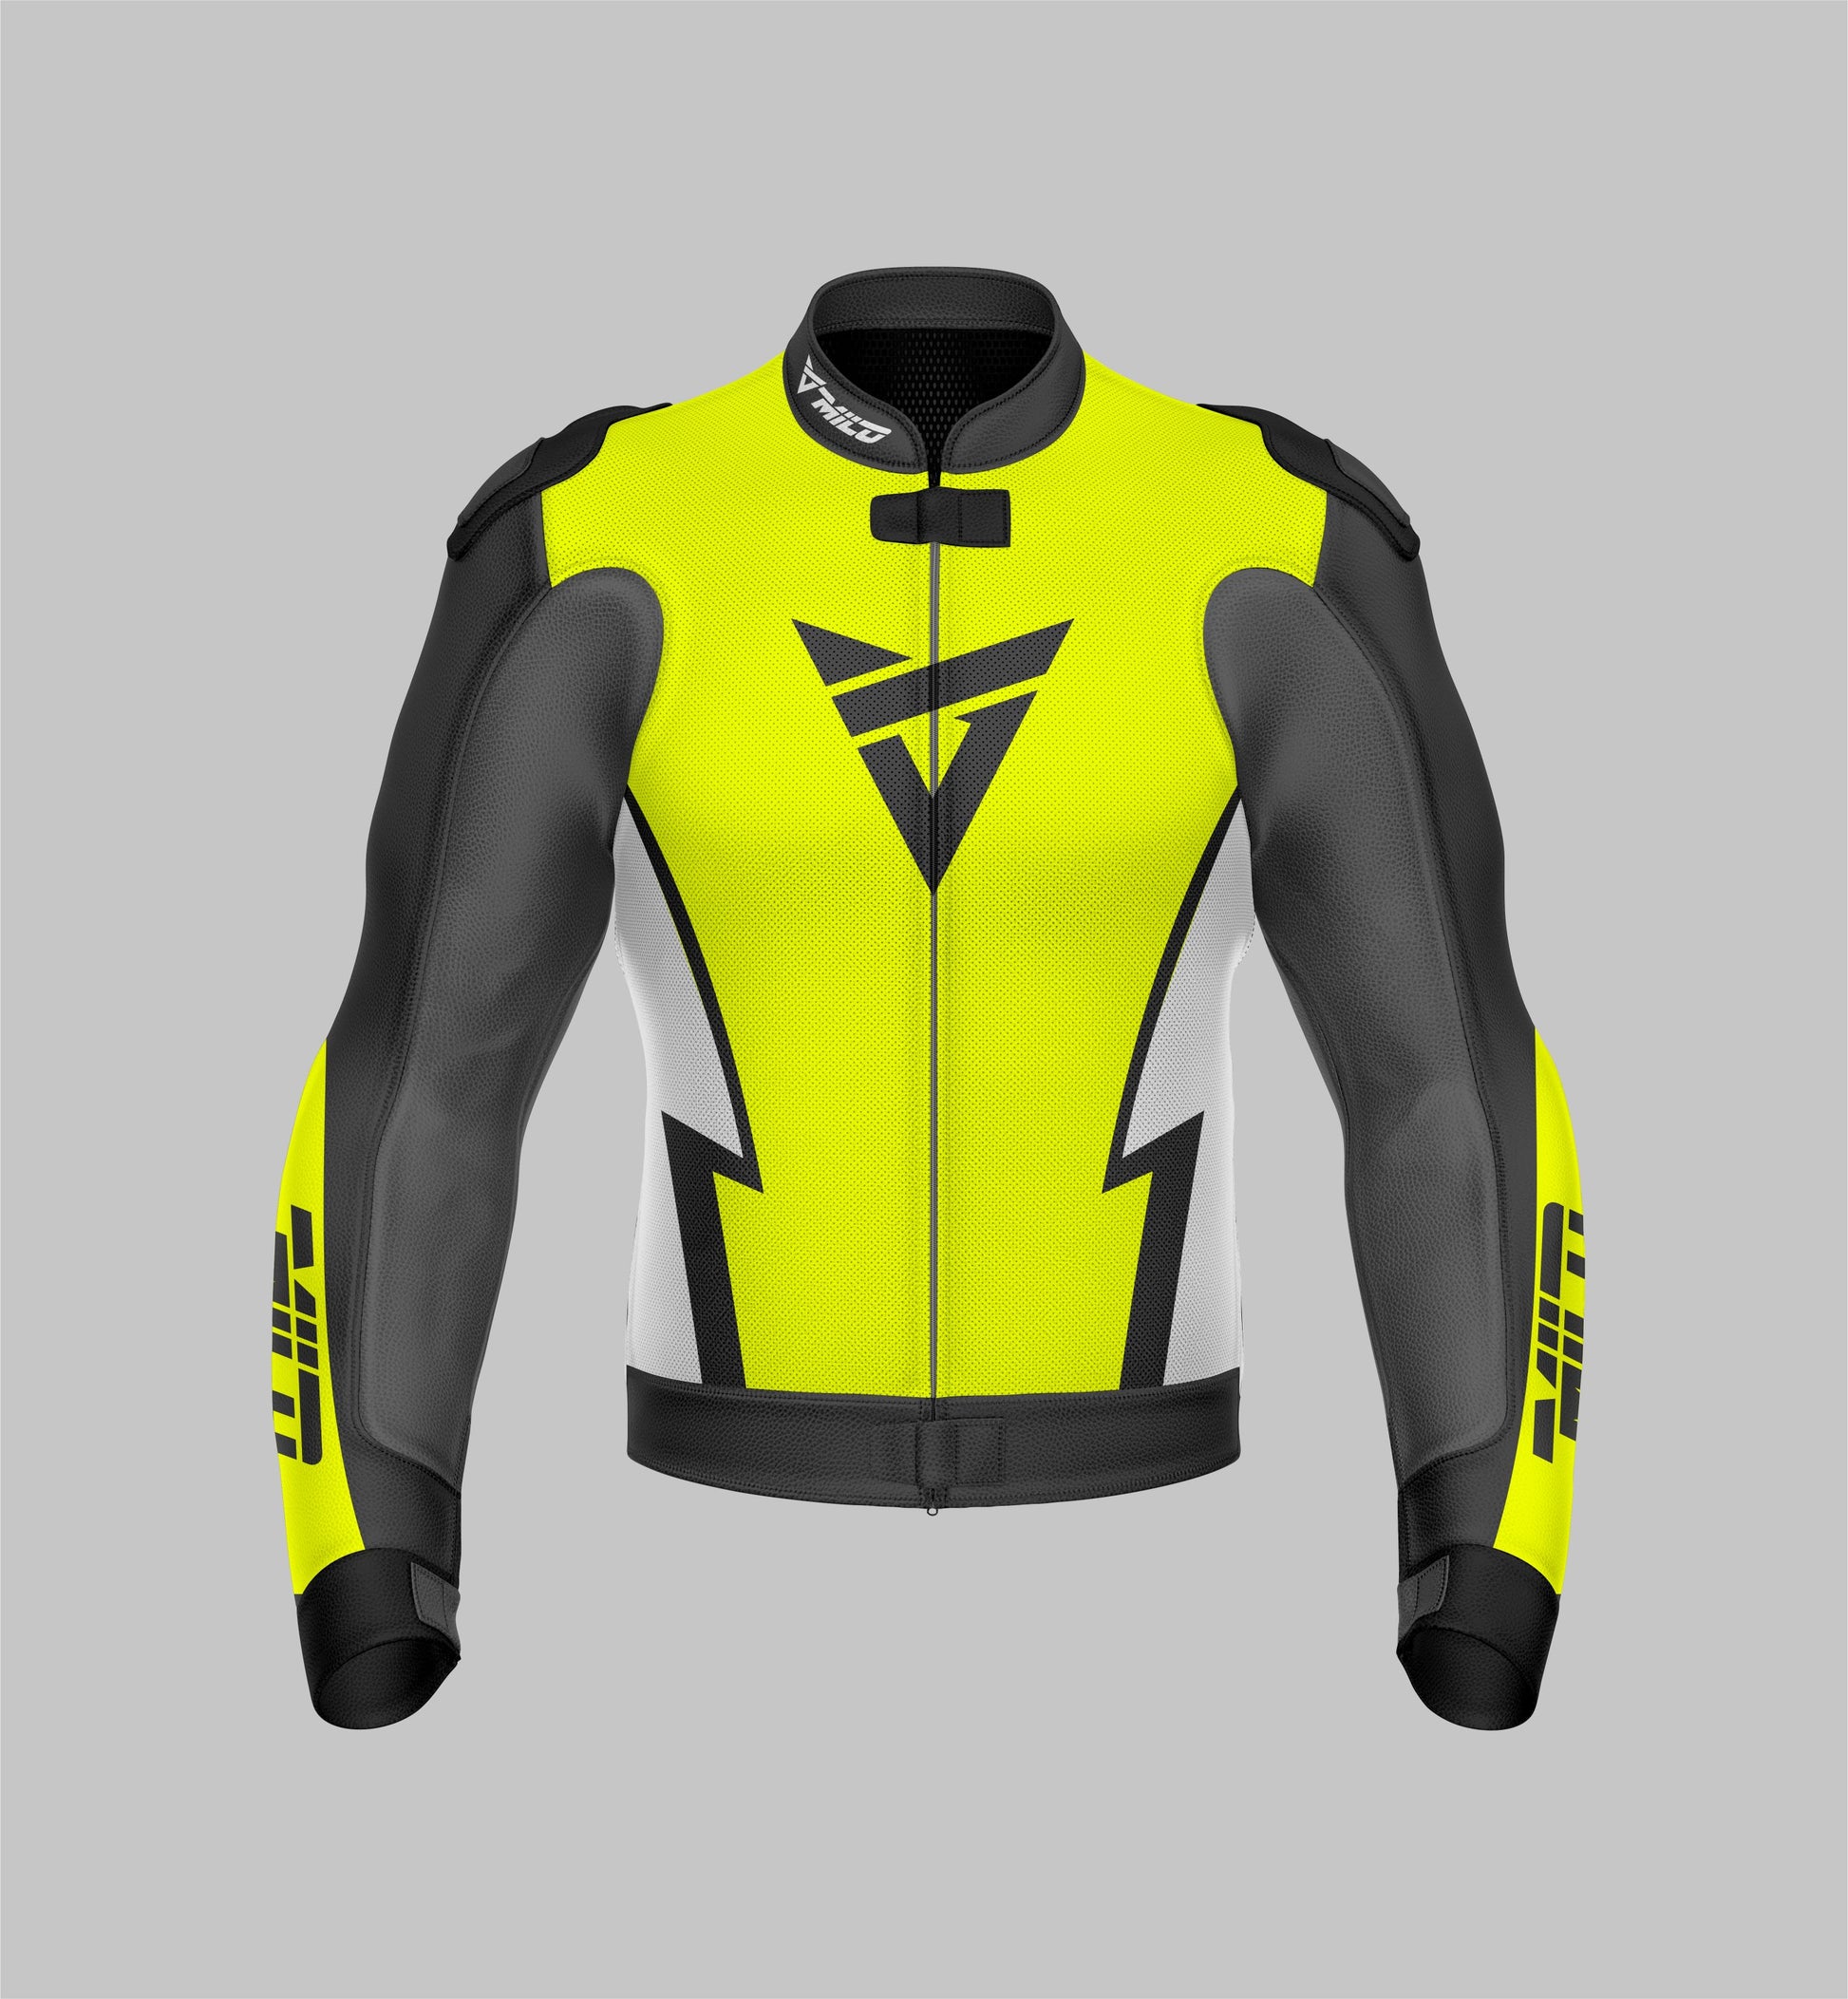 Milo Racing Perforated Leather Jacket Protections Suits - Yellow/Black